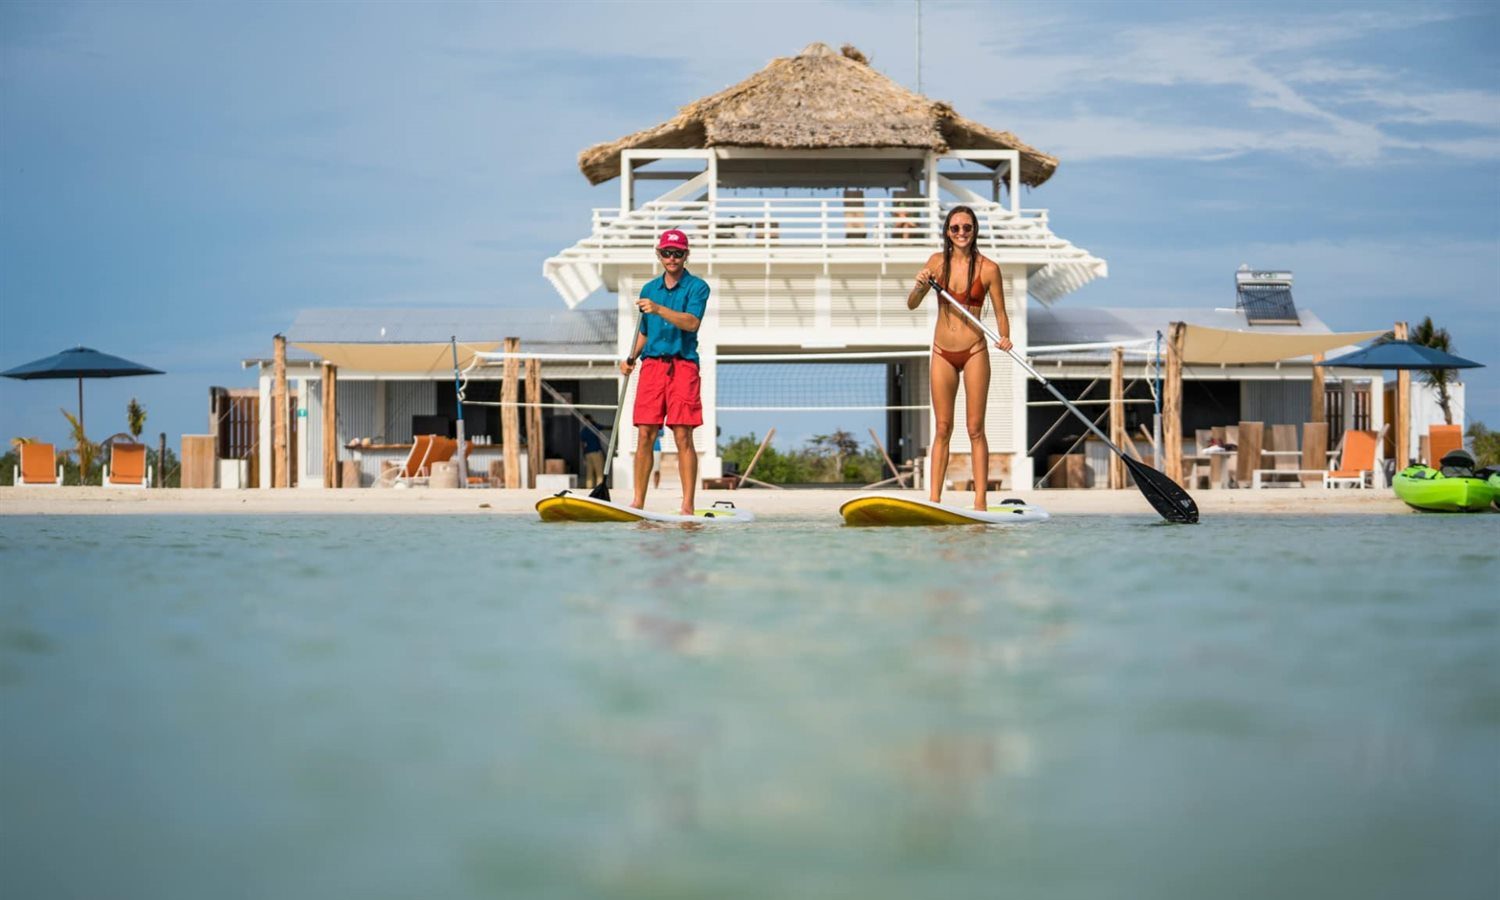 Couple paddleboarding at beach club